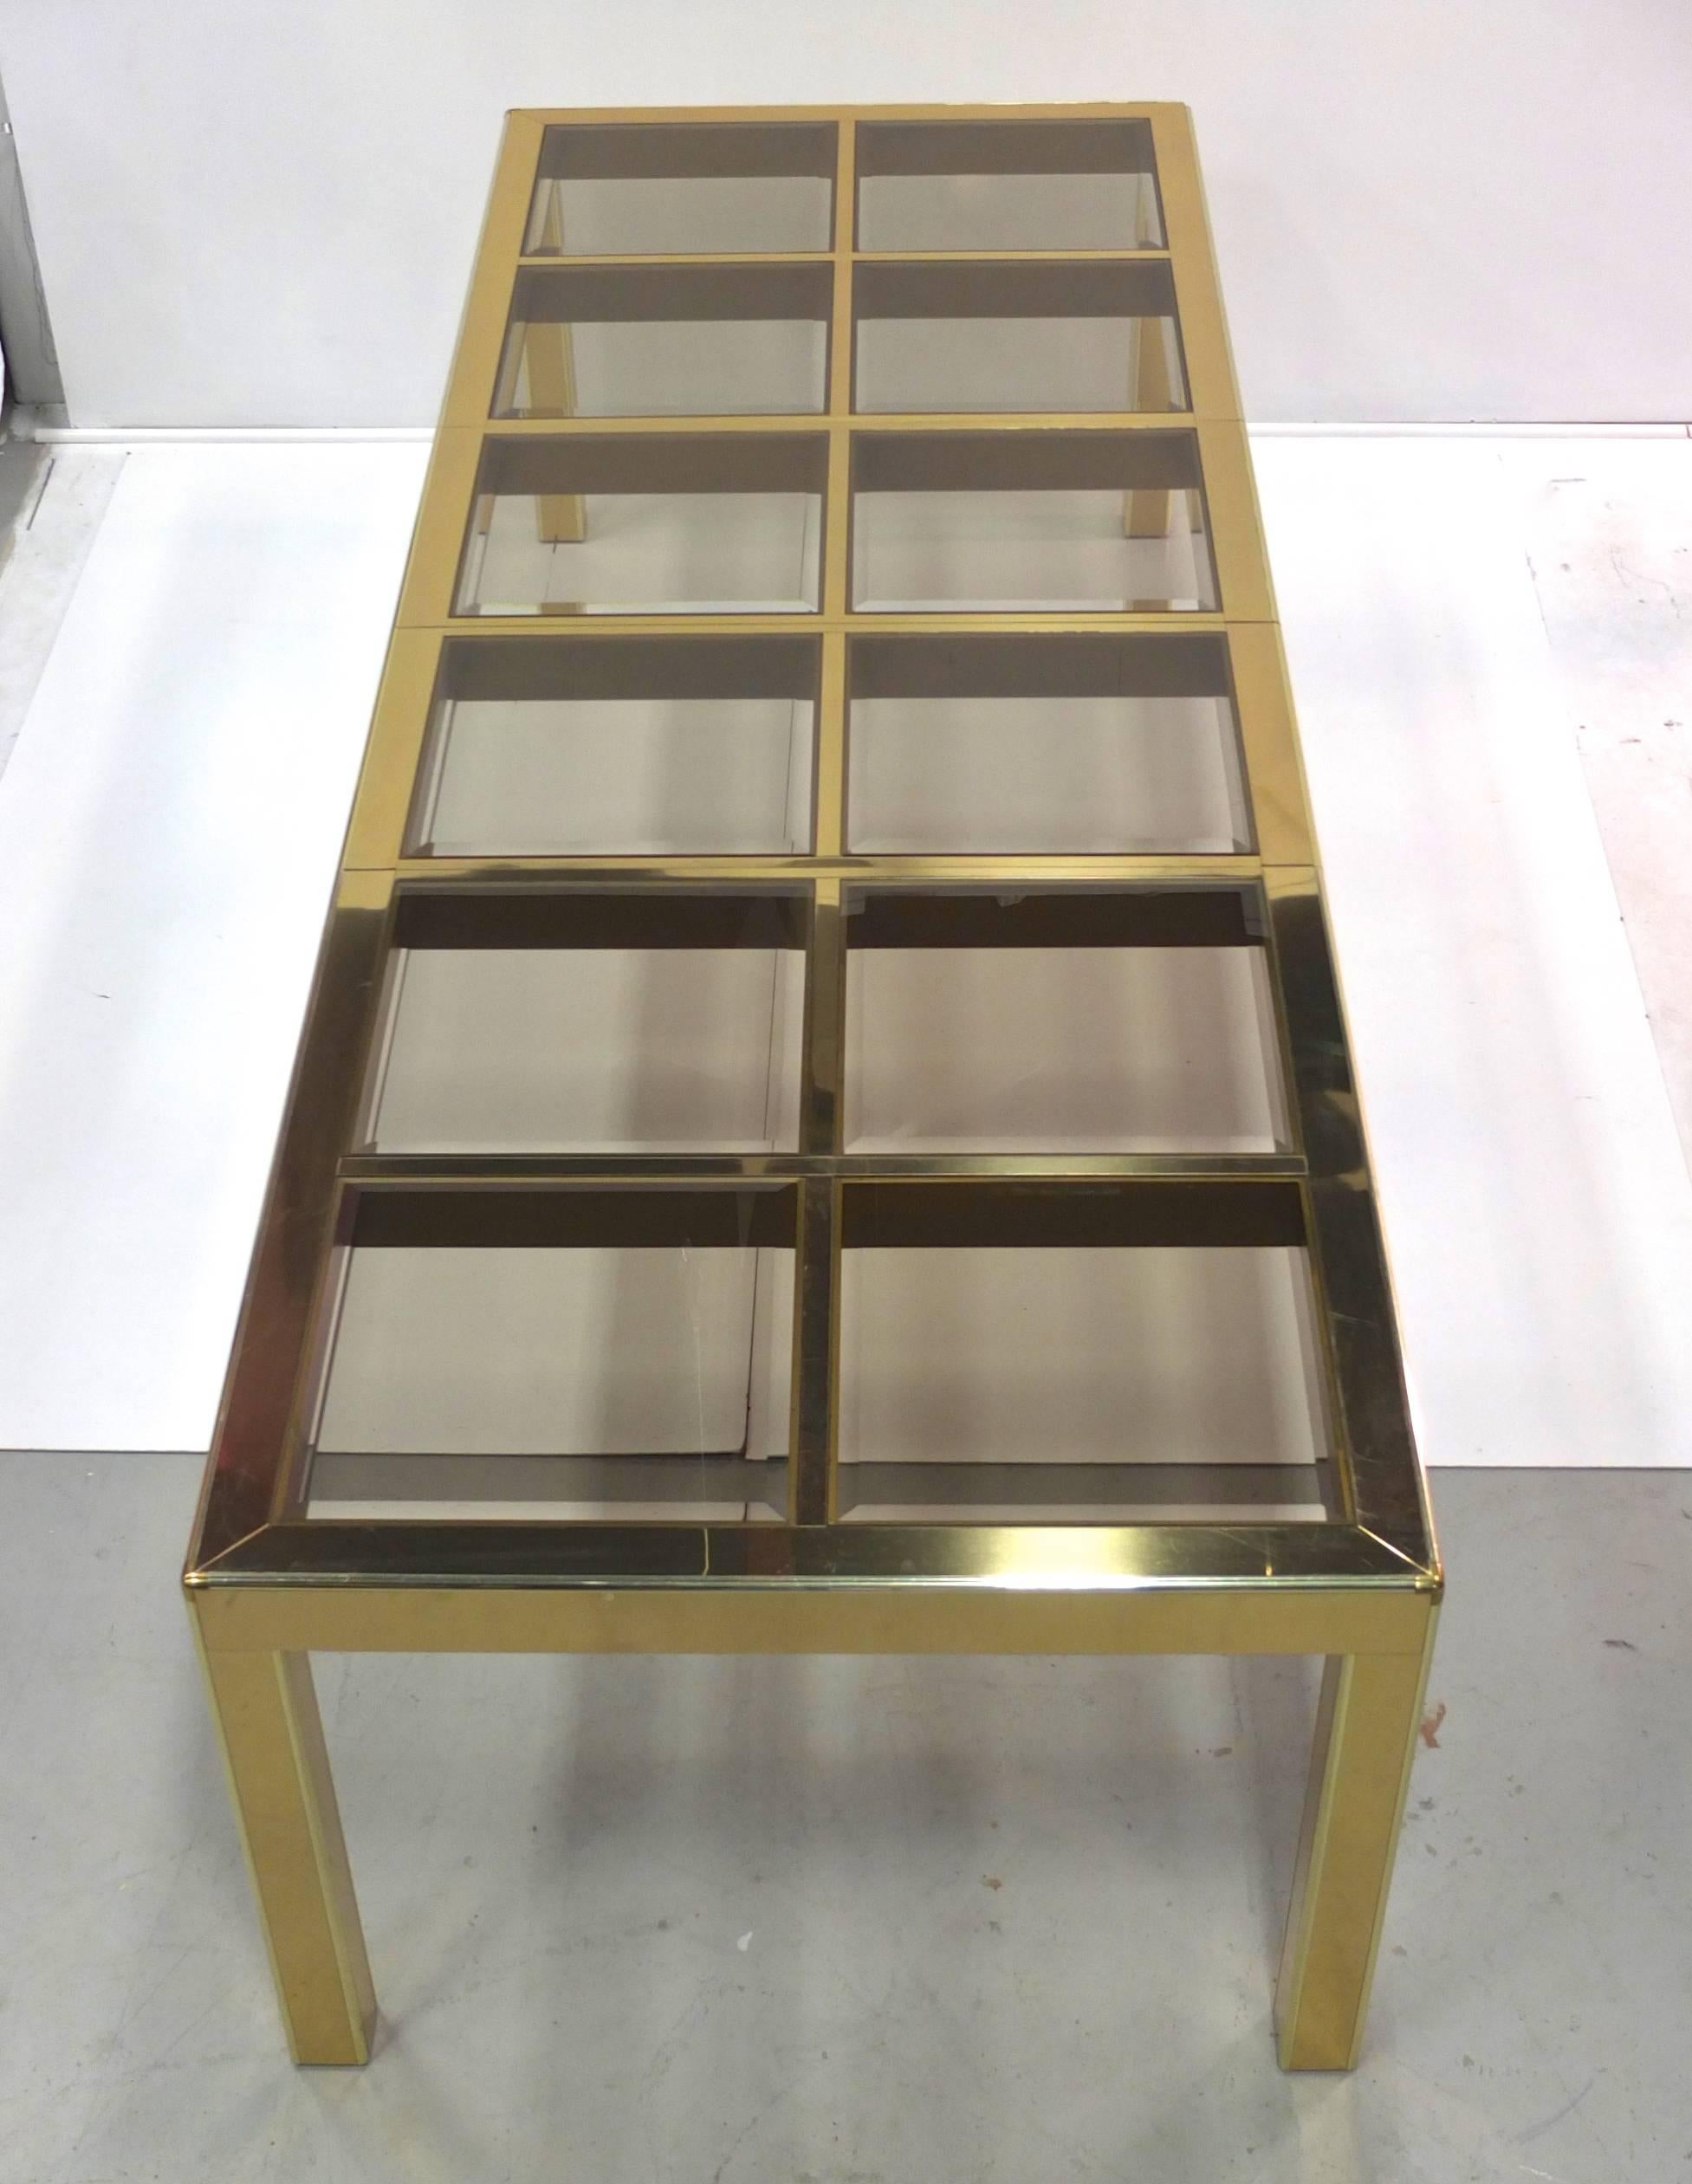 Vintage 1970s Mastercraft extendible dining table clad in mirror polished brass with twelve transparent smoked beveled glass squares inset into the top. Including both 19.5